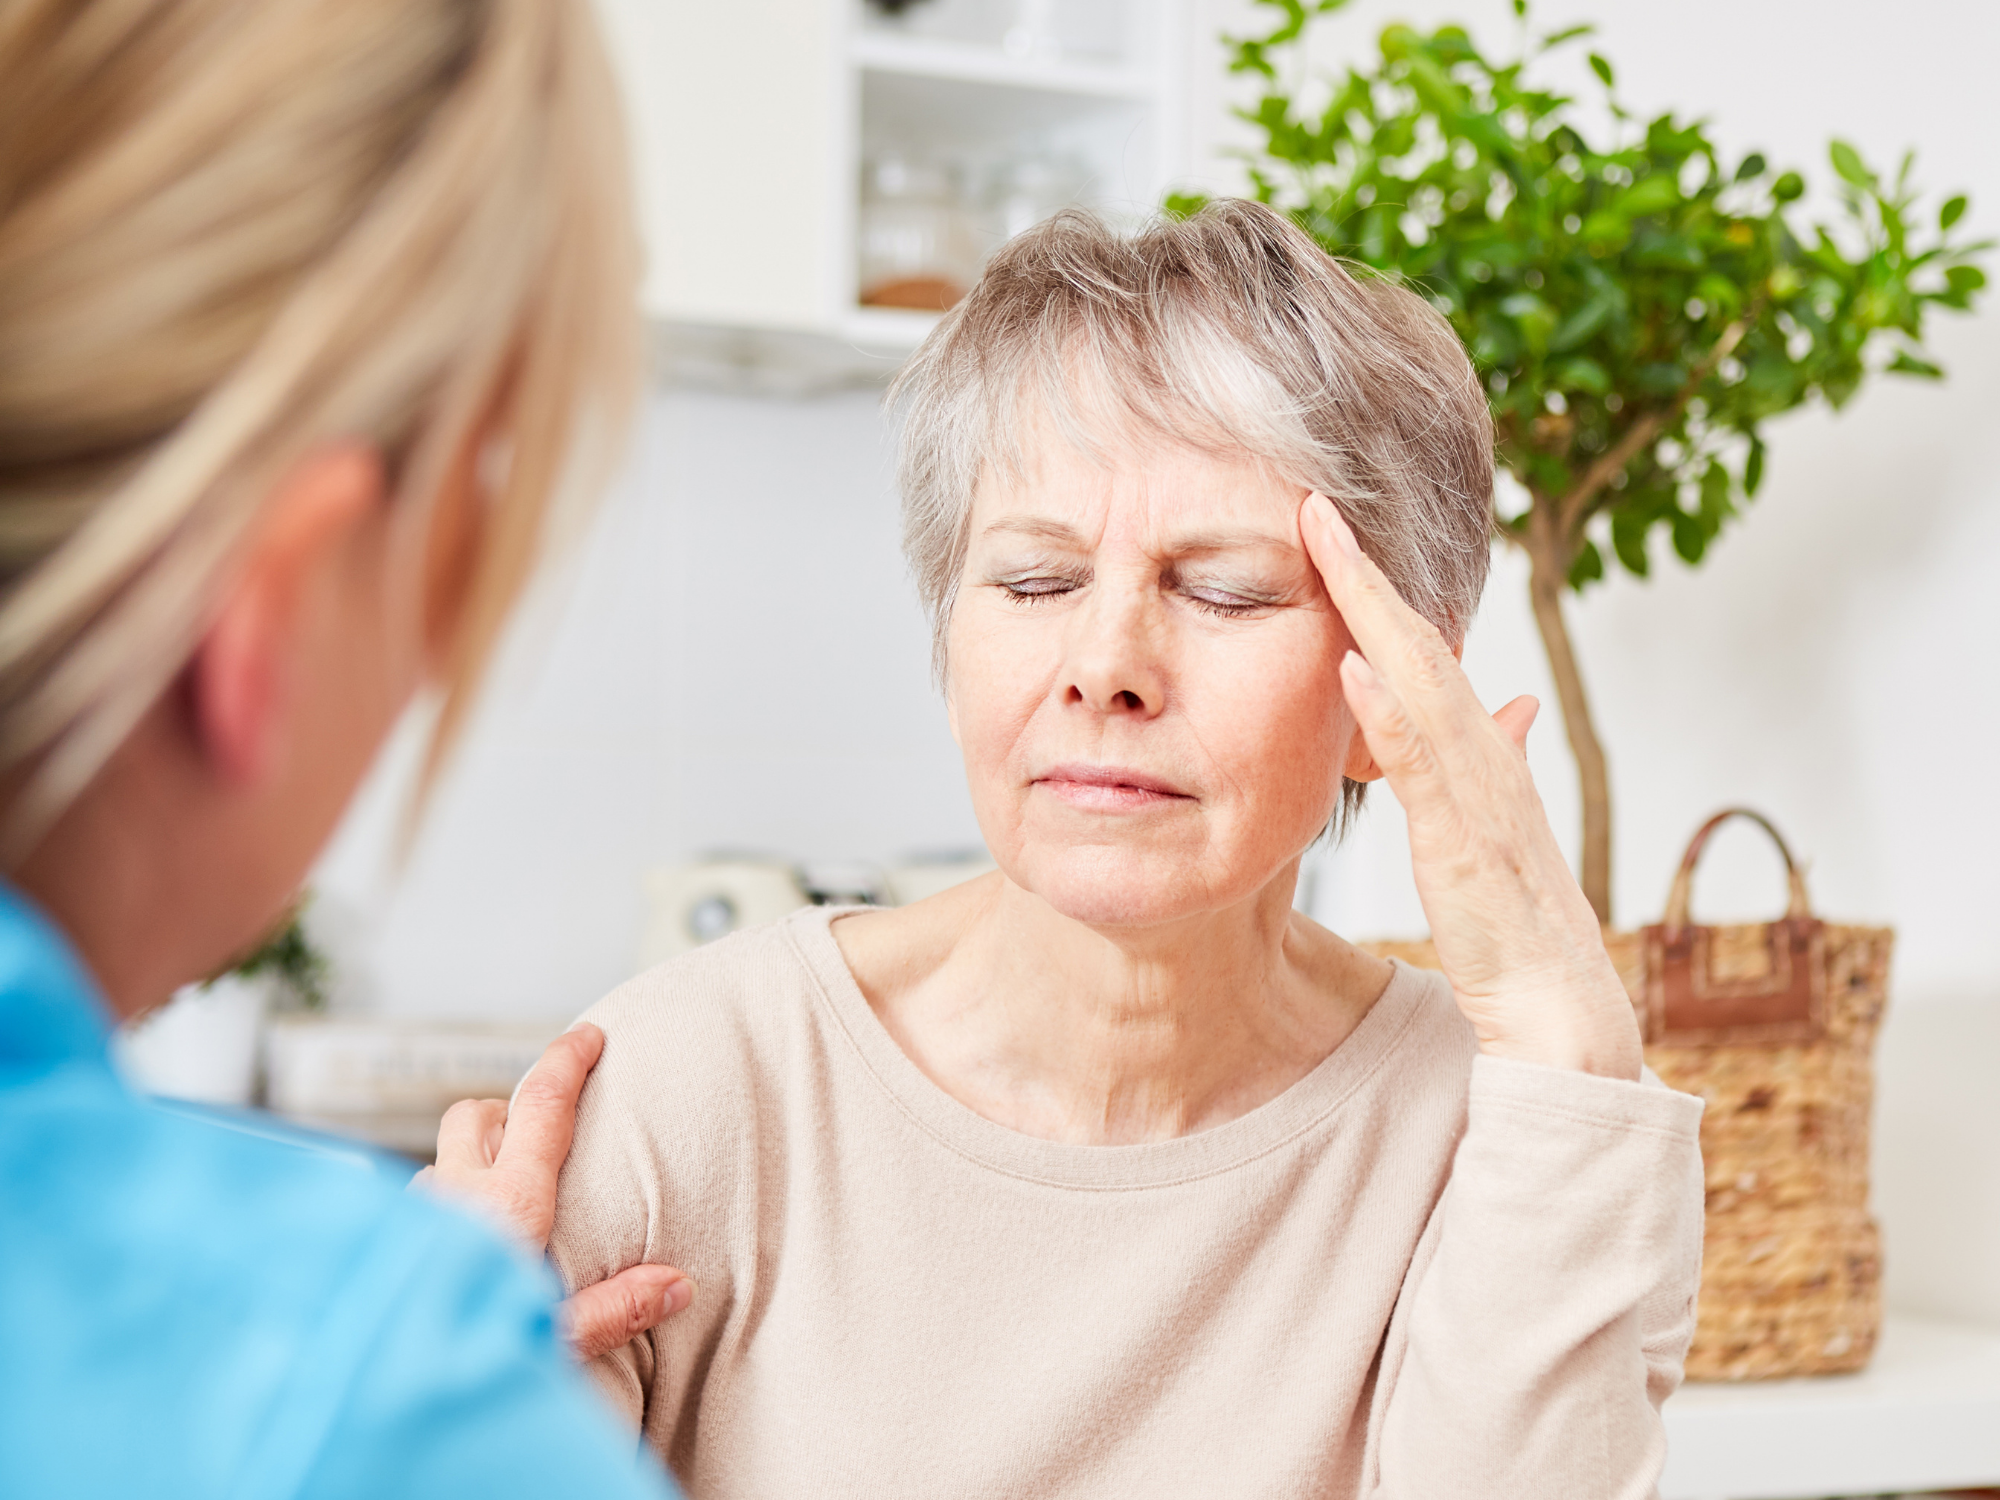 Could your eyes show signs of Alzheimer’s disease?